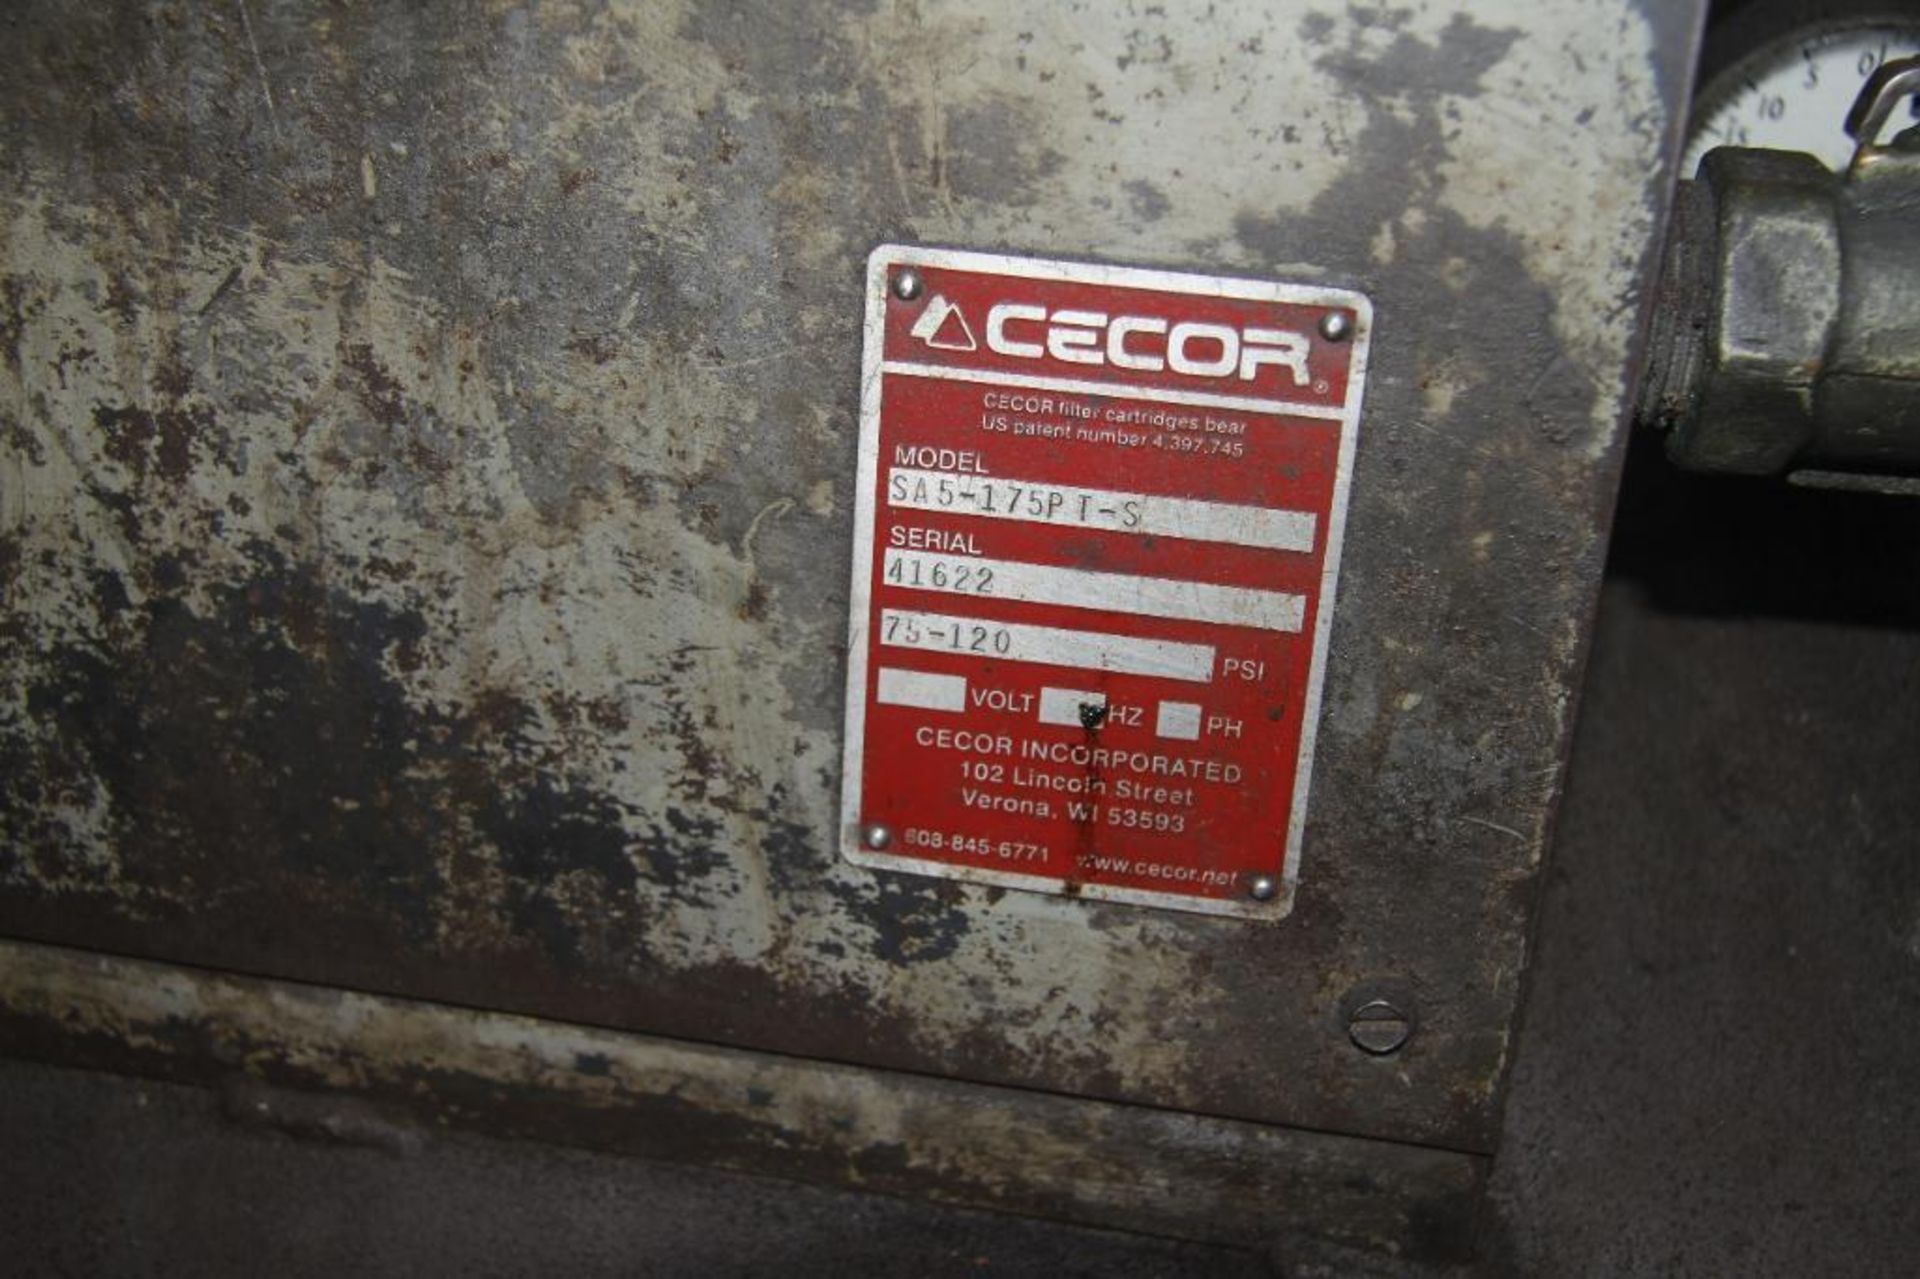 Cecor Mdl.9a5-175pt-S Portable Oil Sump Pump & Tank, S/N:41622 - Image 3 of 3